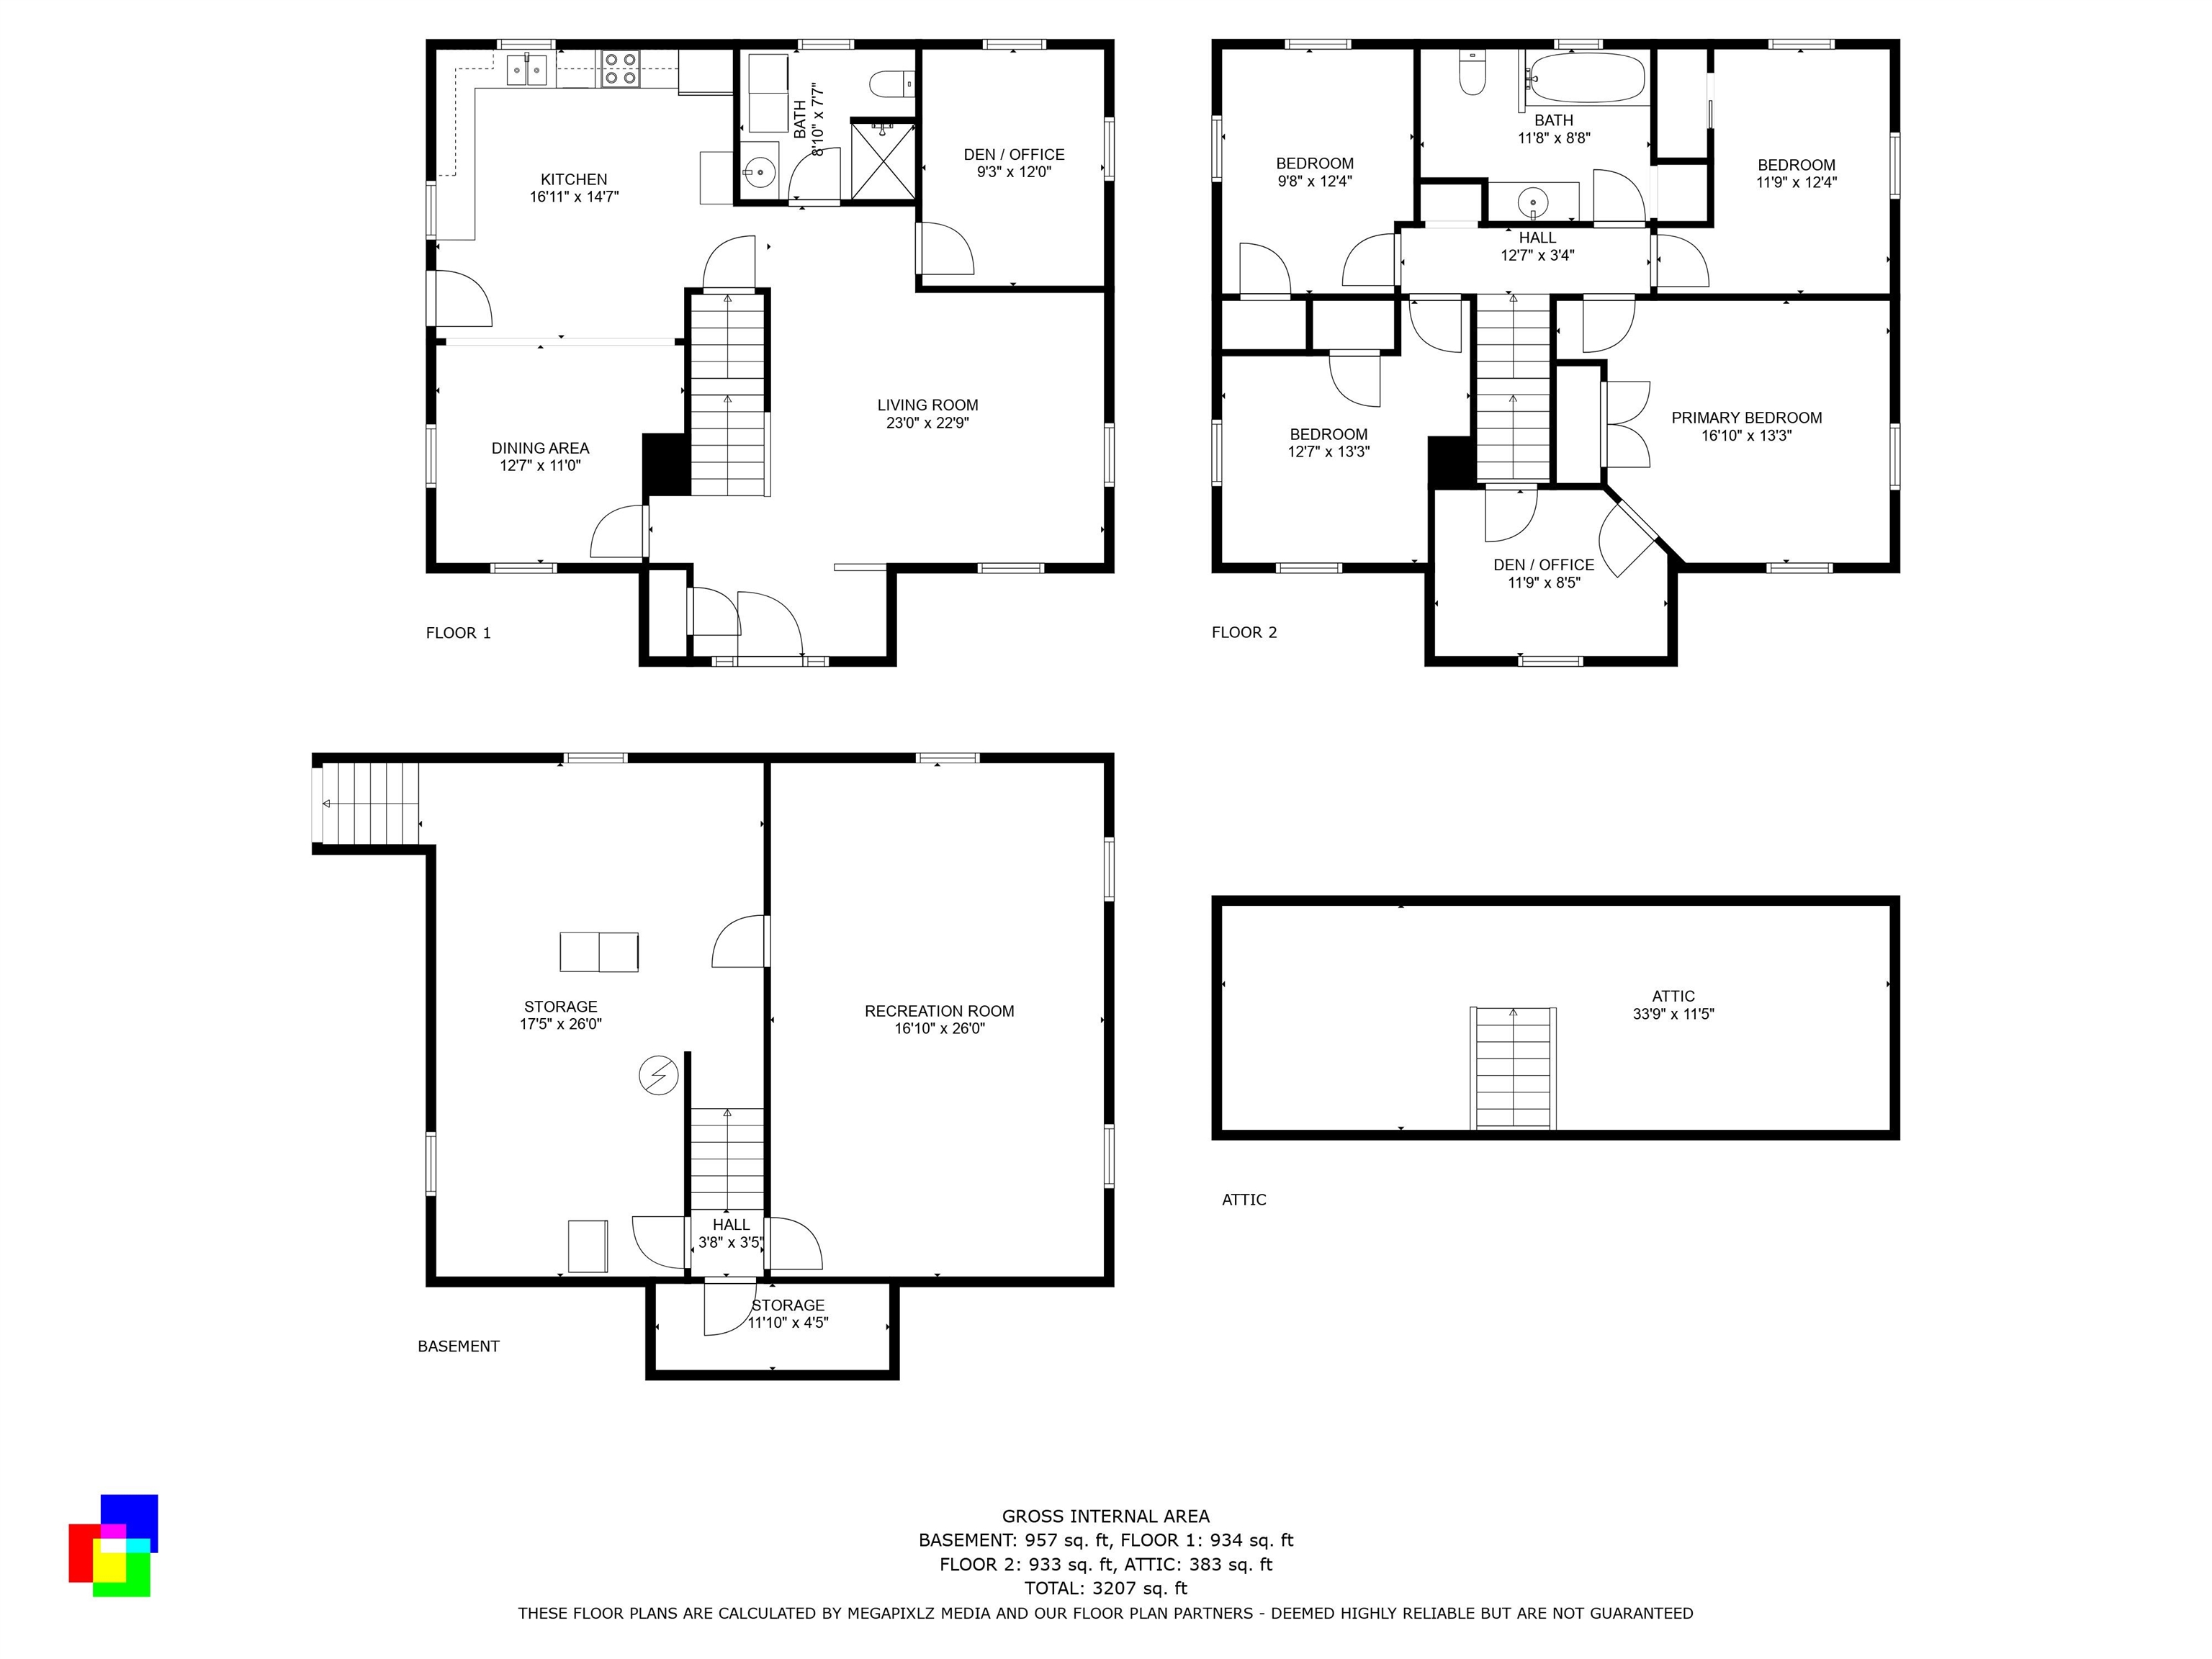 Combined floor plans for all levels